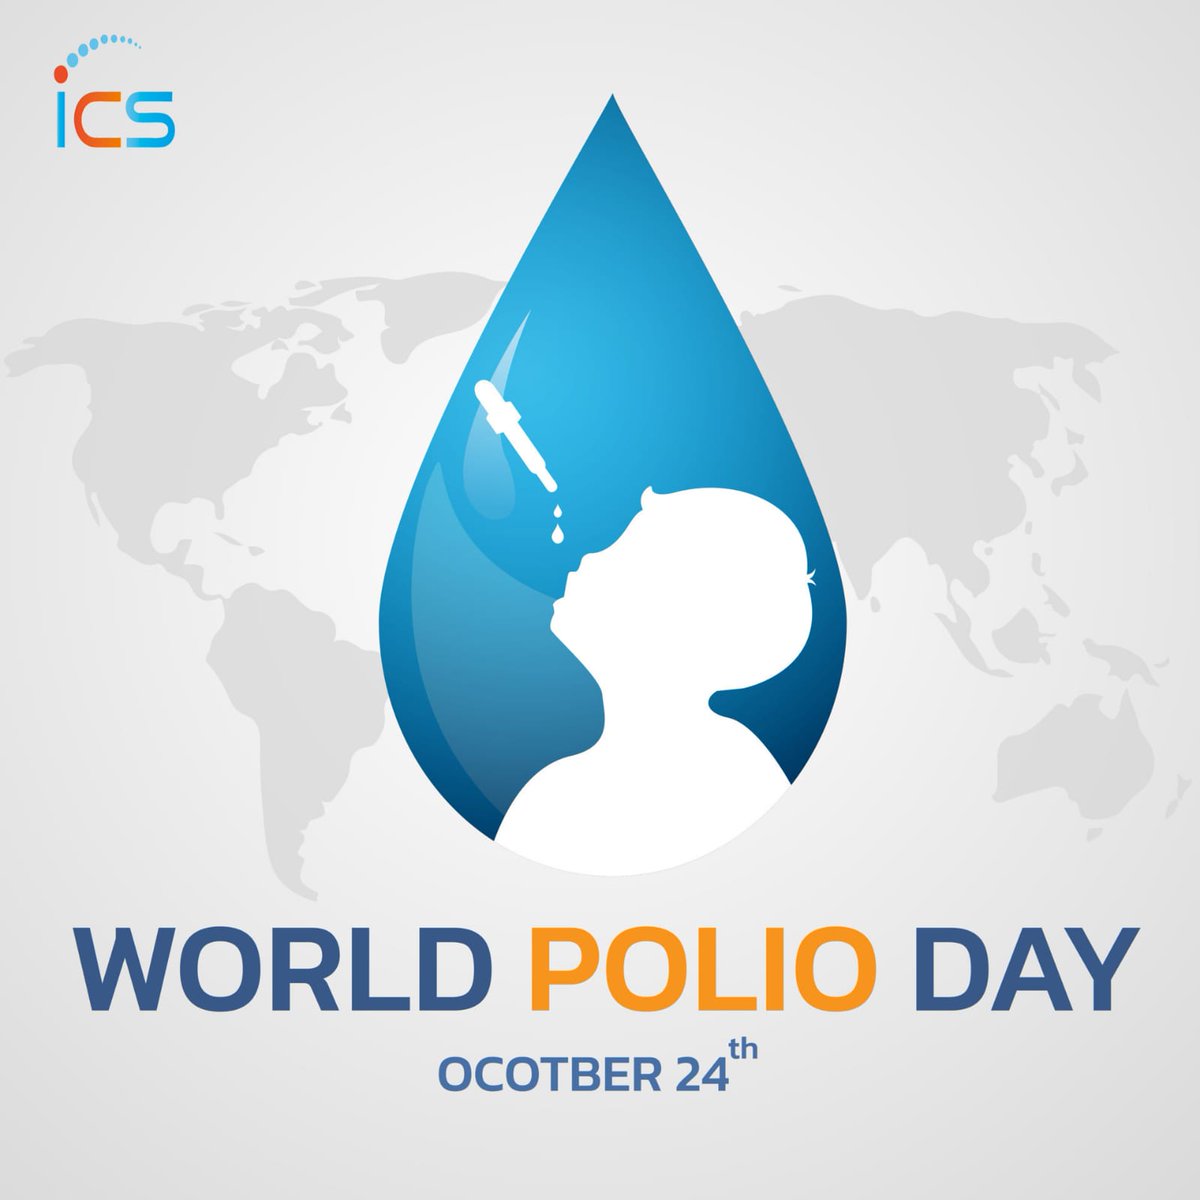 On World Polio Day, let's raise our voices and our awareness to ensure a polio-free world for all children. Together, we can make it happen! 

#WorldPolioDay #EndPolio #PolioFreeWorld #PolioFreeFuture #VaccinesWork 
#PublicHealth #ChildHealth #NoPolio #PolioAwareness